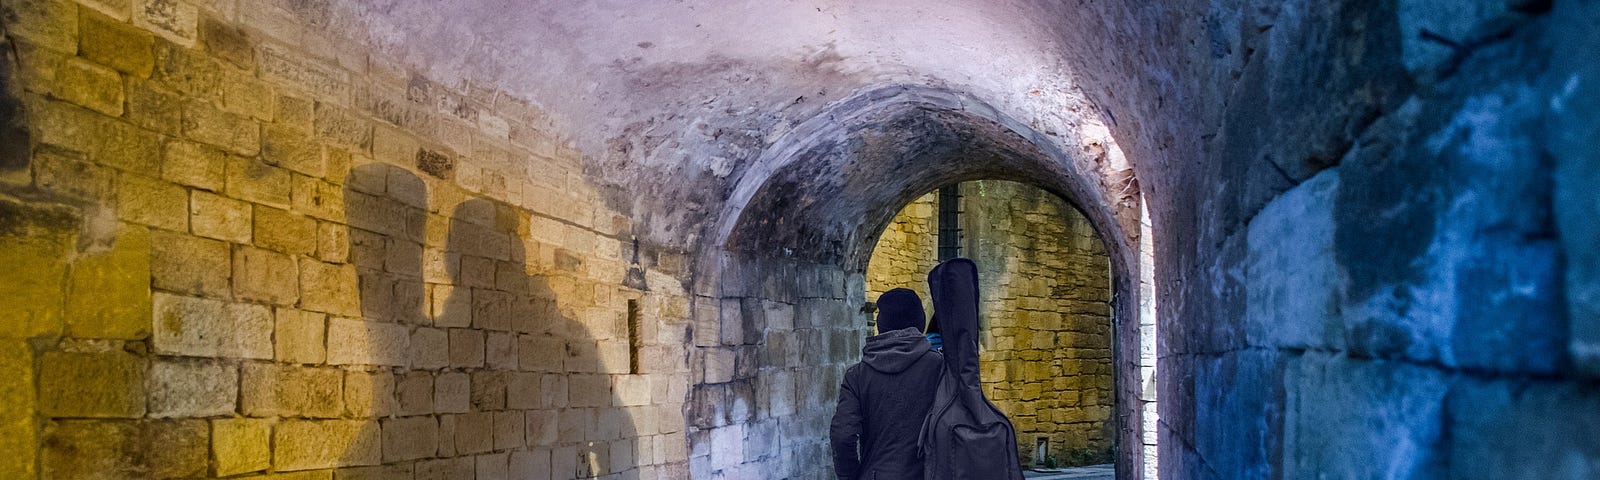 A tunnel between stone walls, shaded in yellow-orange and blue. A person clothed in black walks away on the cobblestones, carrying a guitar in a soft case over one shoulder.